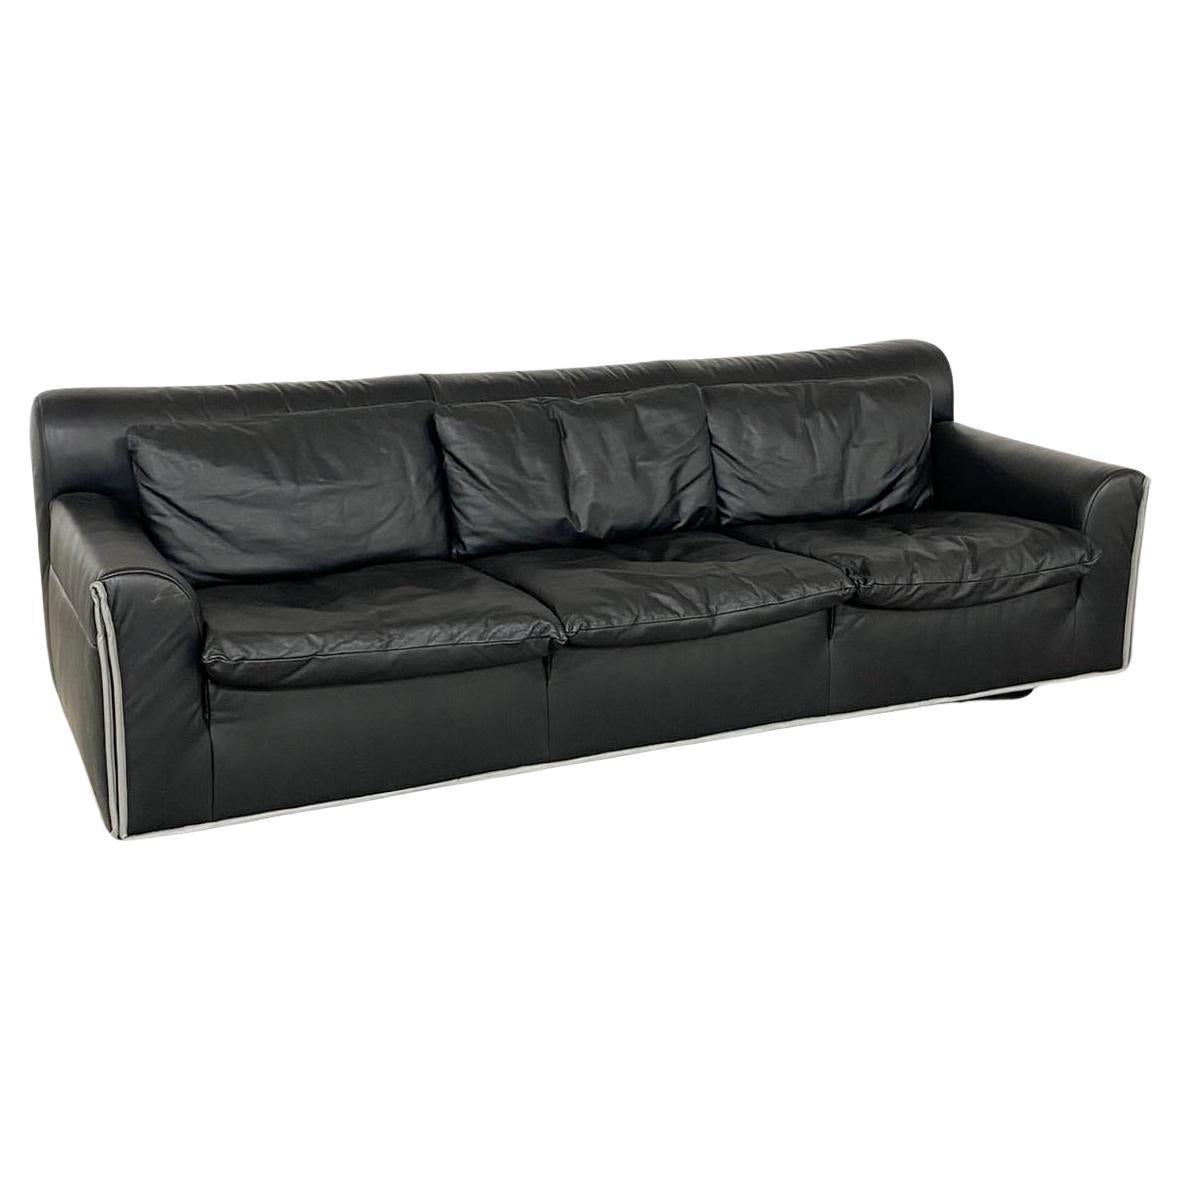 Heli 3-Seater Leather Sofa by Otto Zapf for Knoll, 1980s For Sale